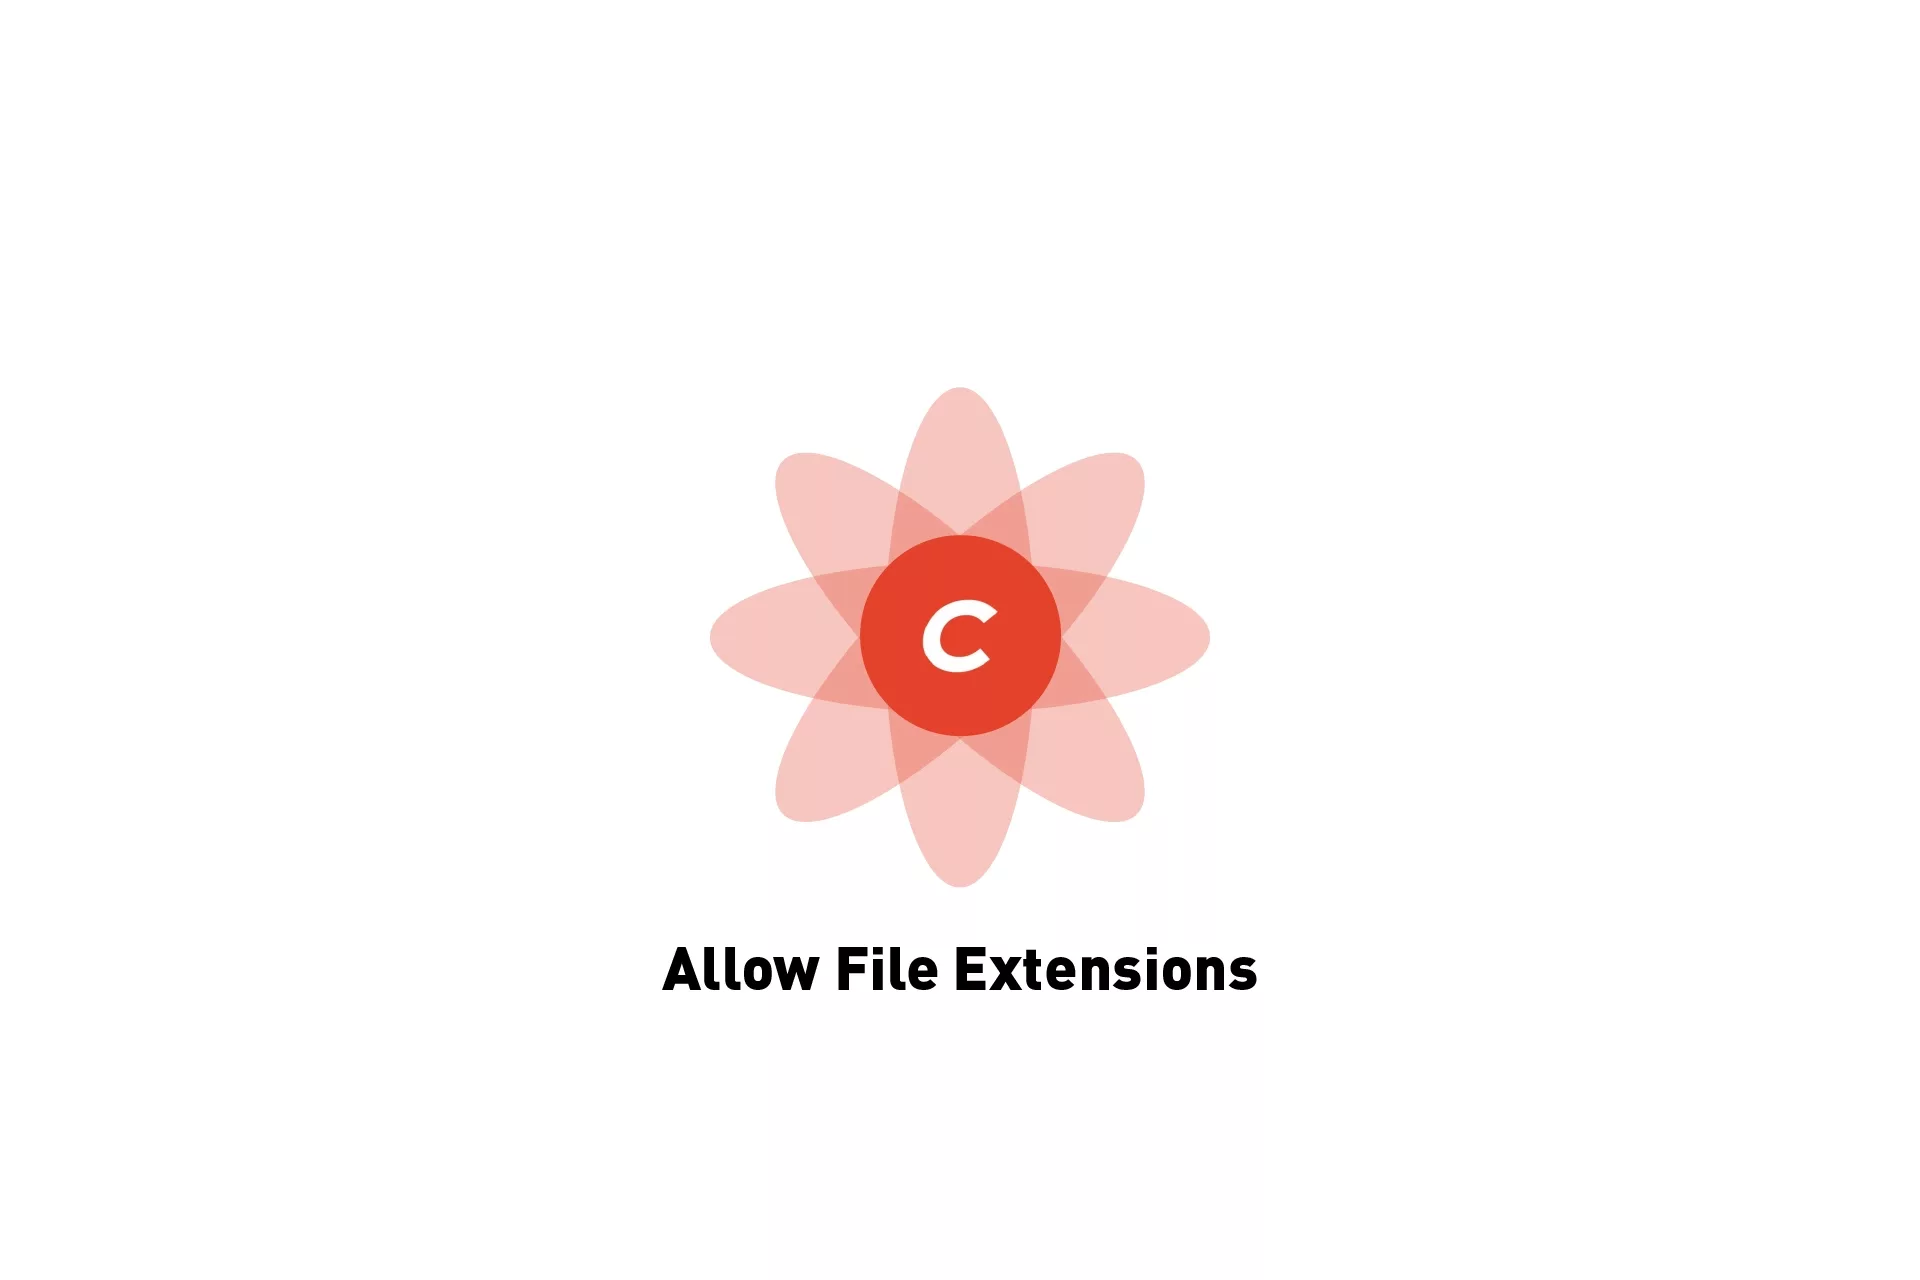 A flower that represents Craft CMS with the text 'Allow File Extensions' beneath it.